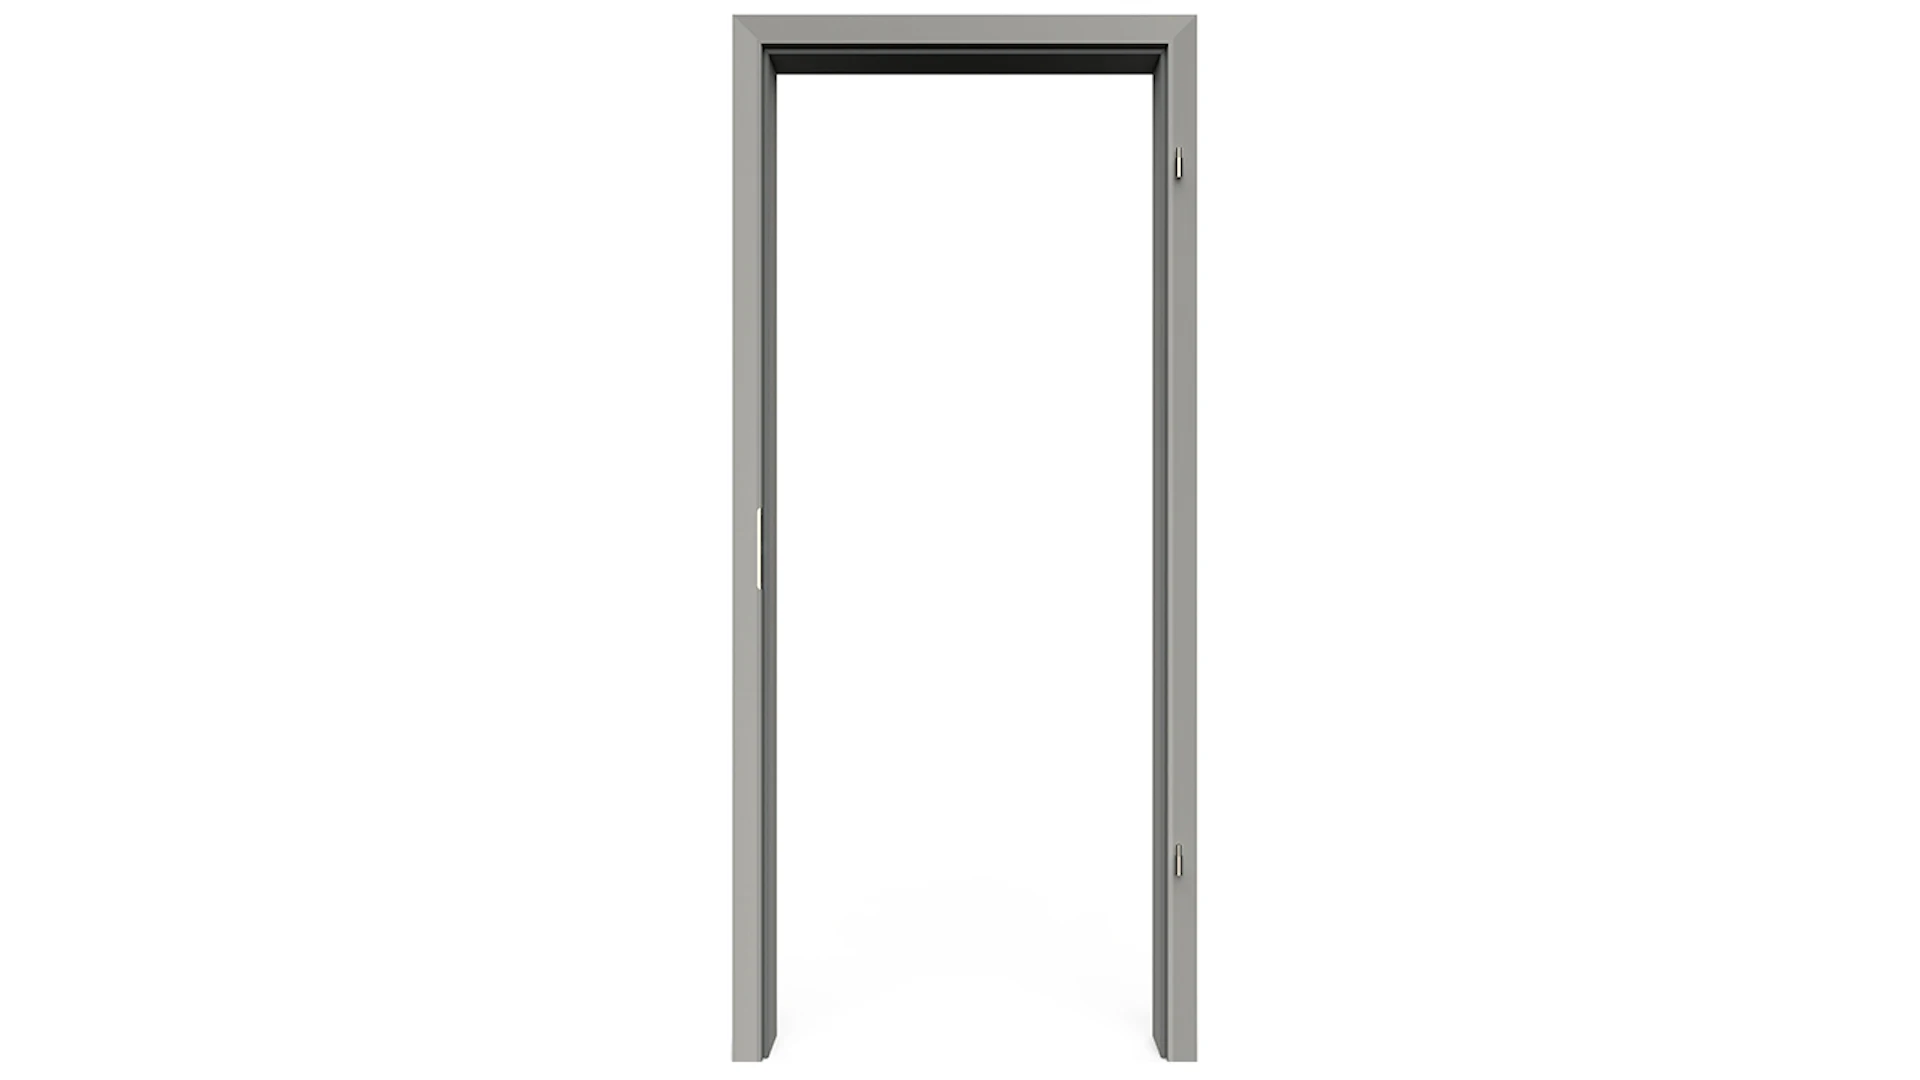 planeo Standard Door frame, rounded edge - CPL Silver grey - 1985 x 860 x 330 mm DIN Left